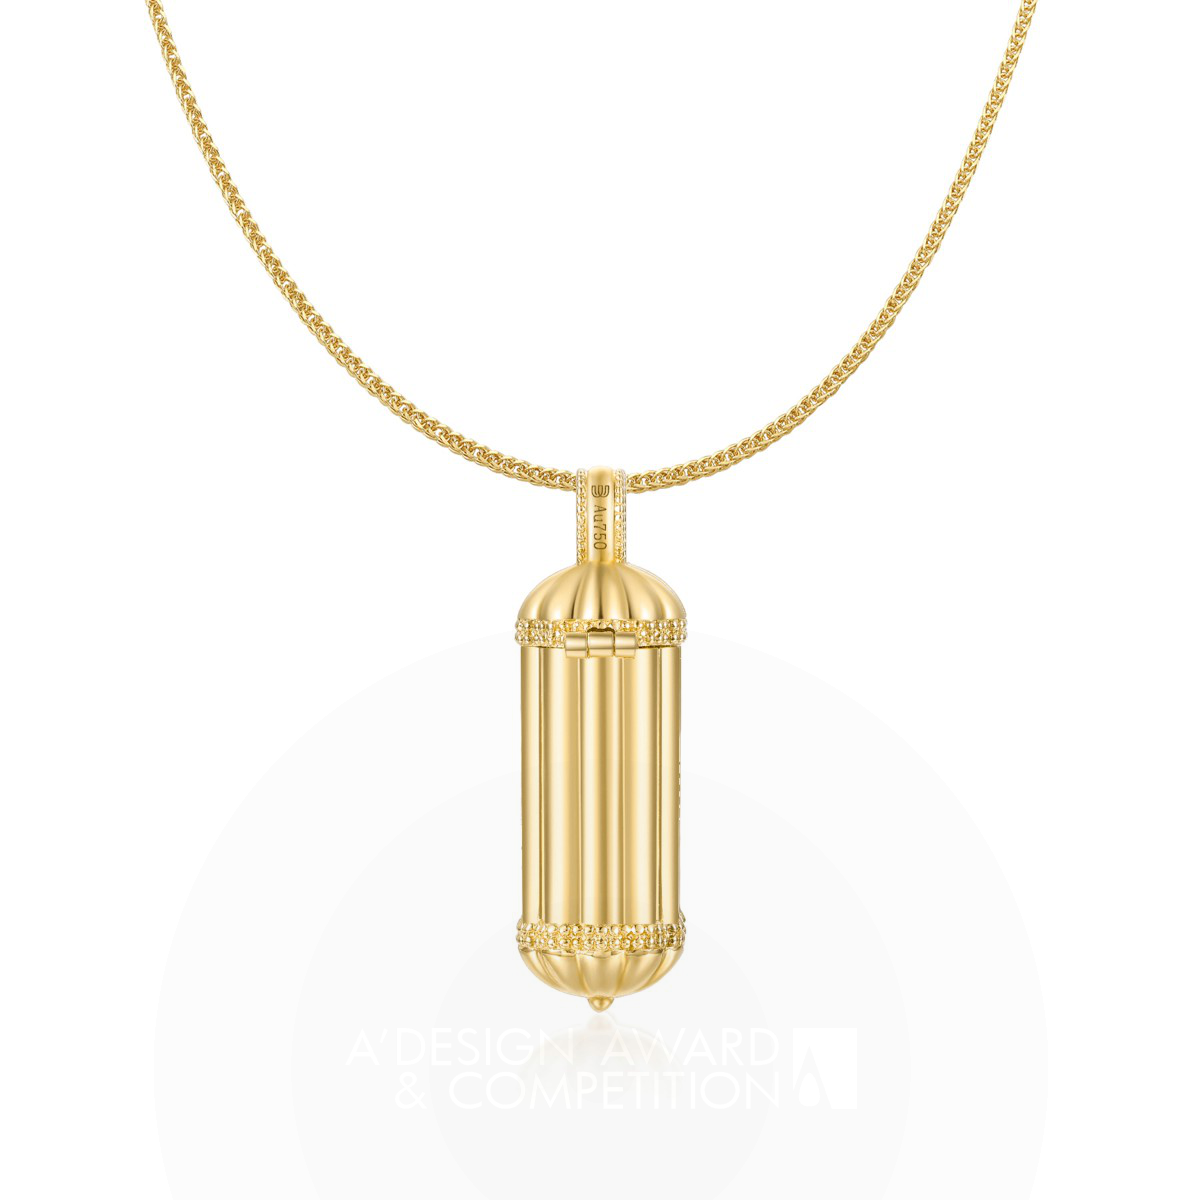 Bowie Wong wins Iron at the prestigious A' Jewelry Design Award with Dhvaja Necklace.